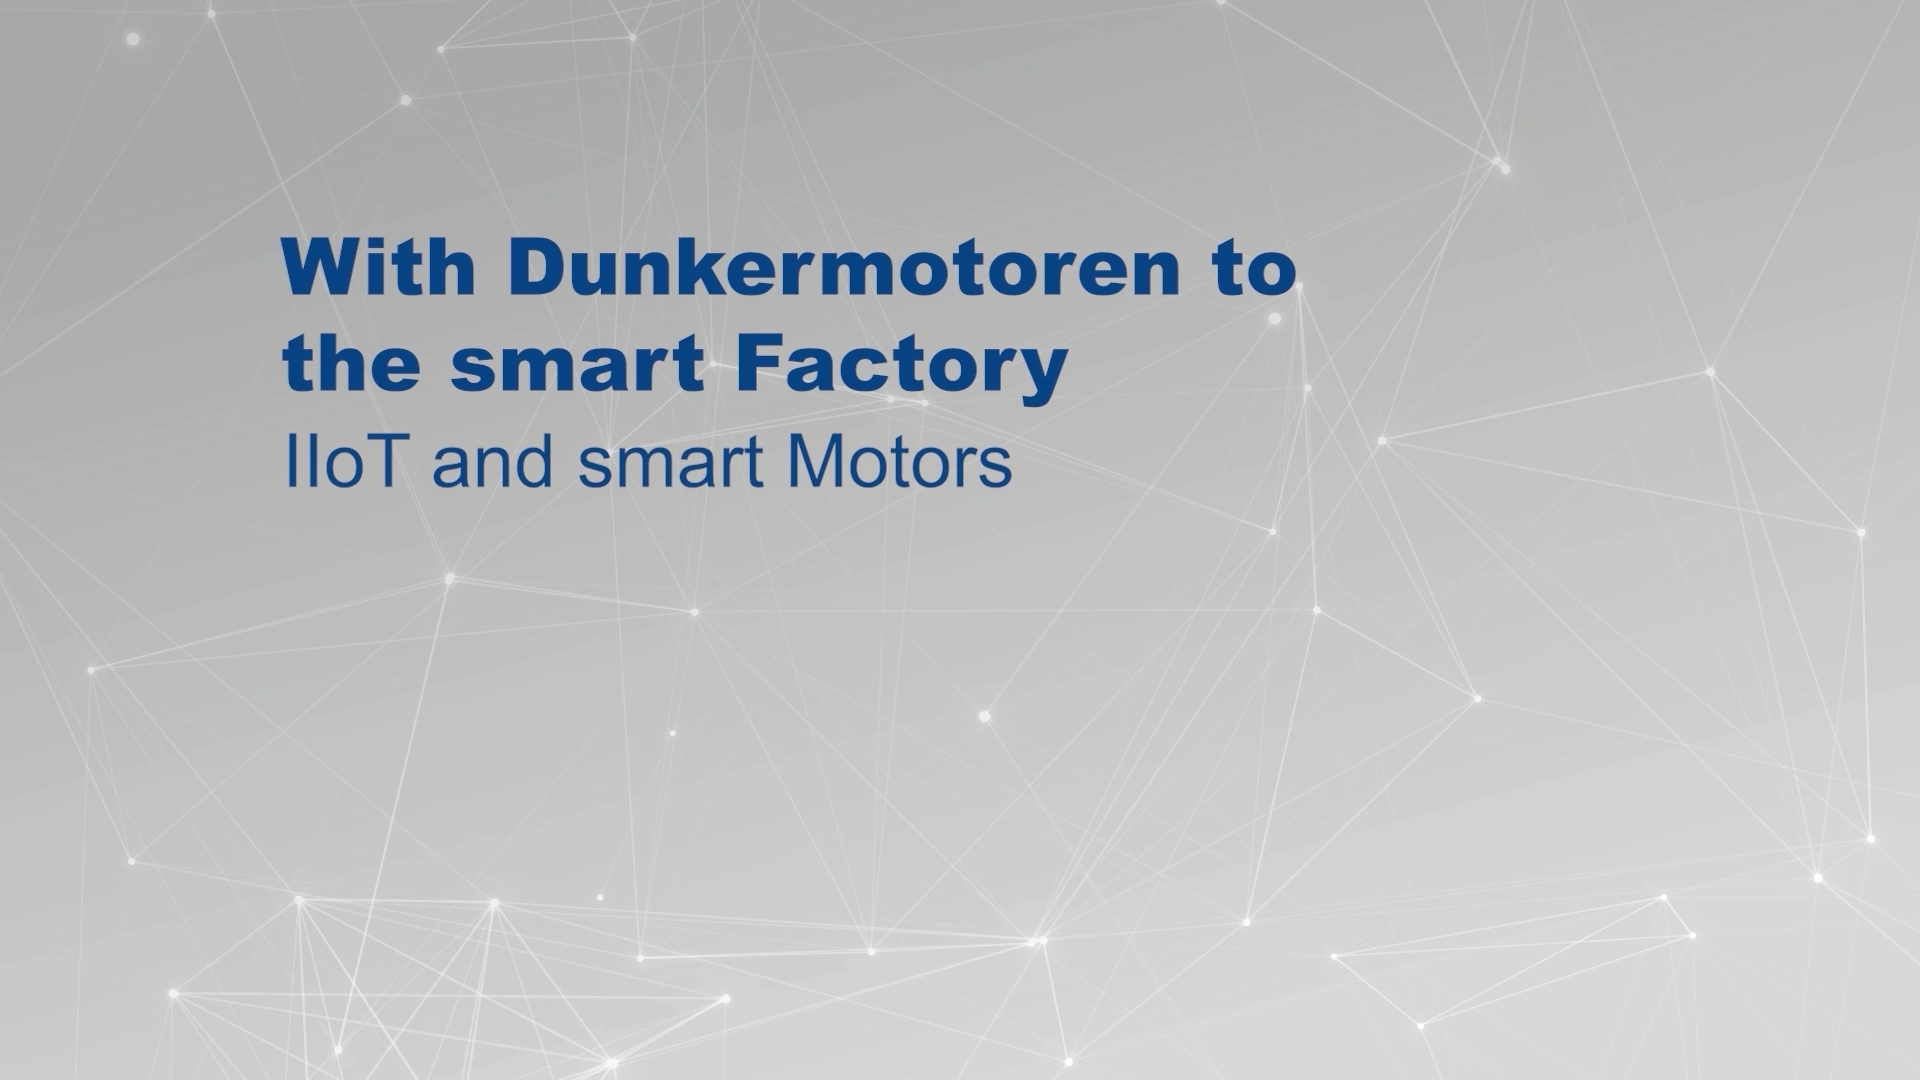 With Dunkermotoren to the smart factory